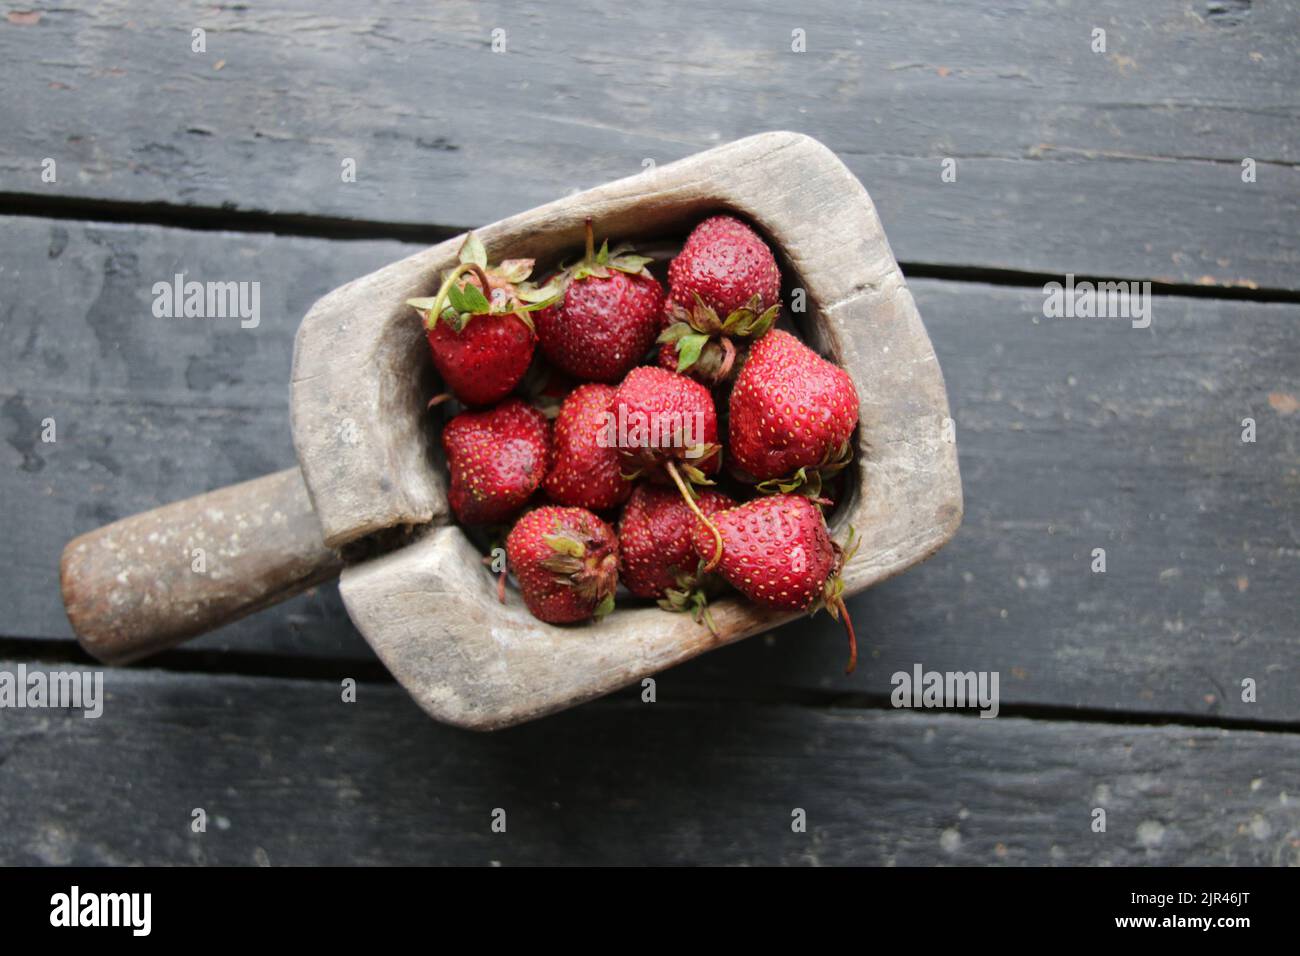 Juicy ripe strawberries in a wooden box. Stock Photo